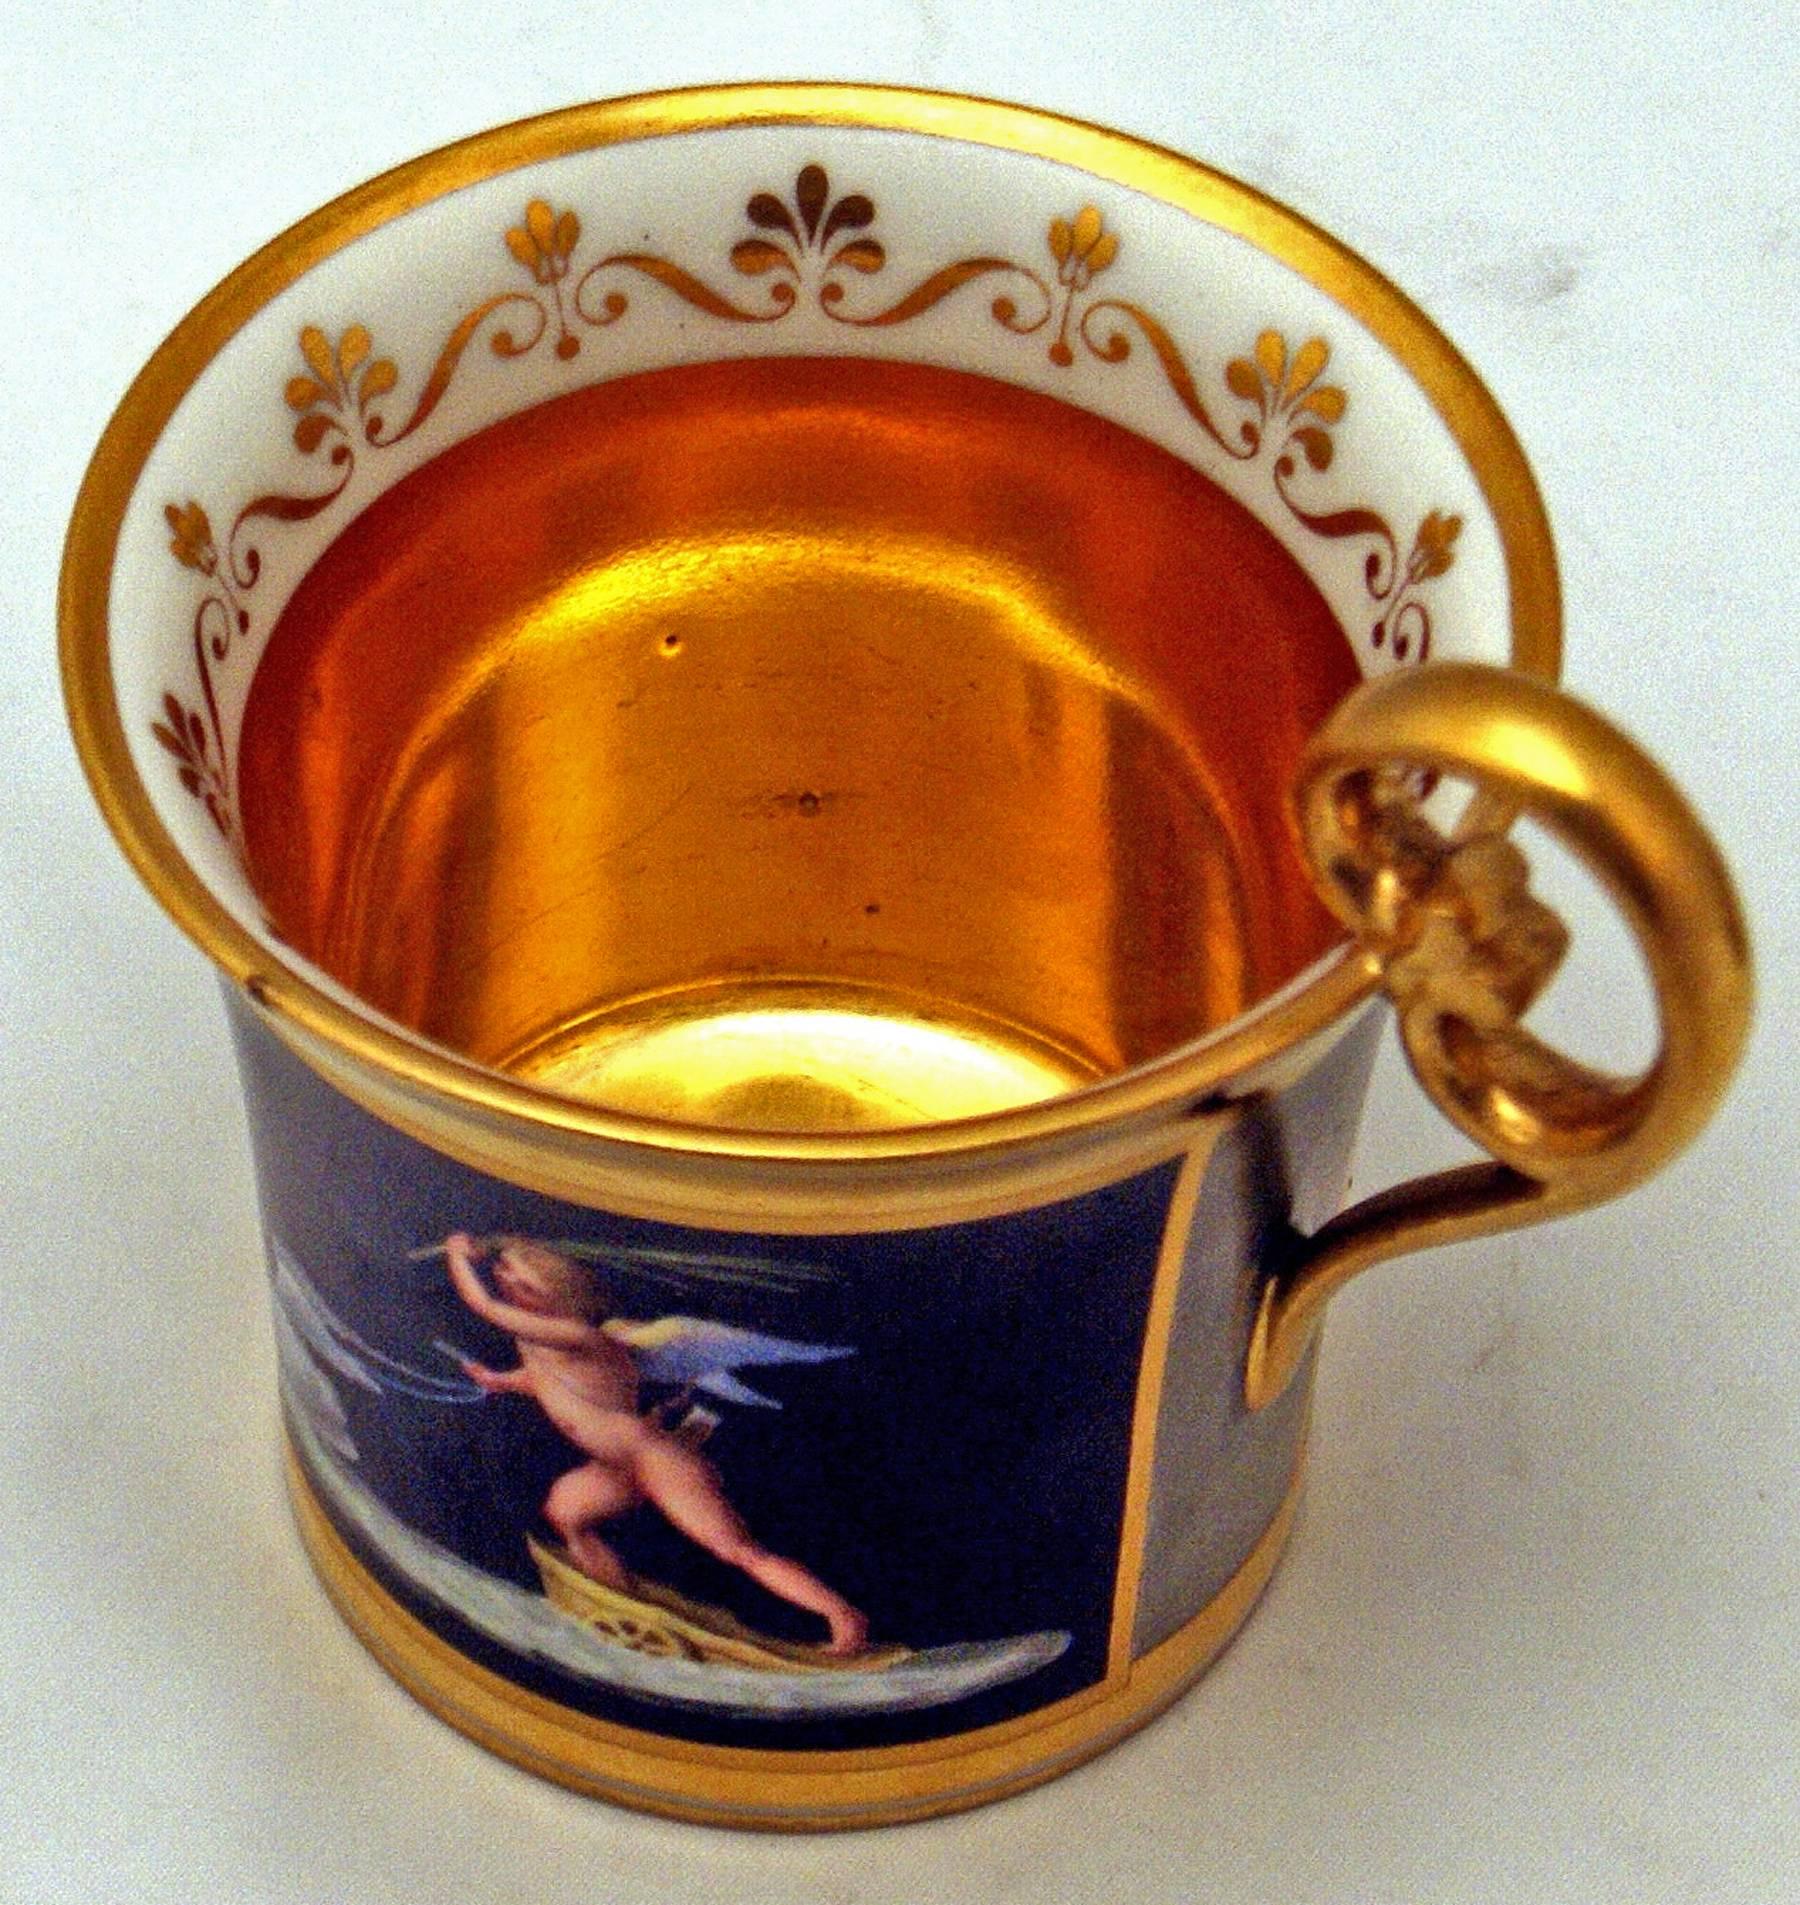 Vienna Imperial Porcelain Cup Saucer Cherubs Driving Chariots Dated 1814 Austria 2